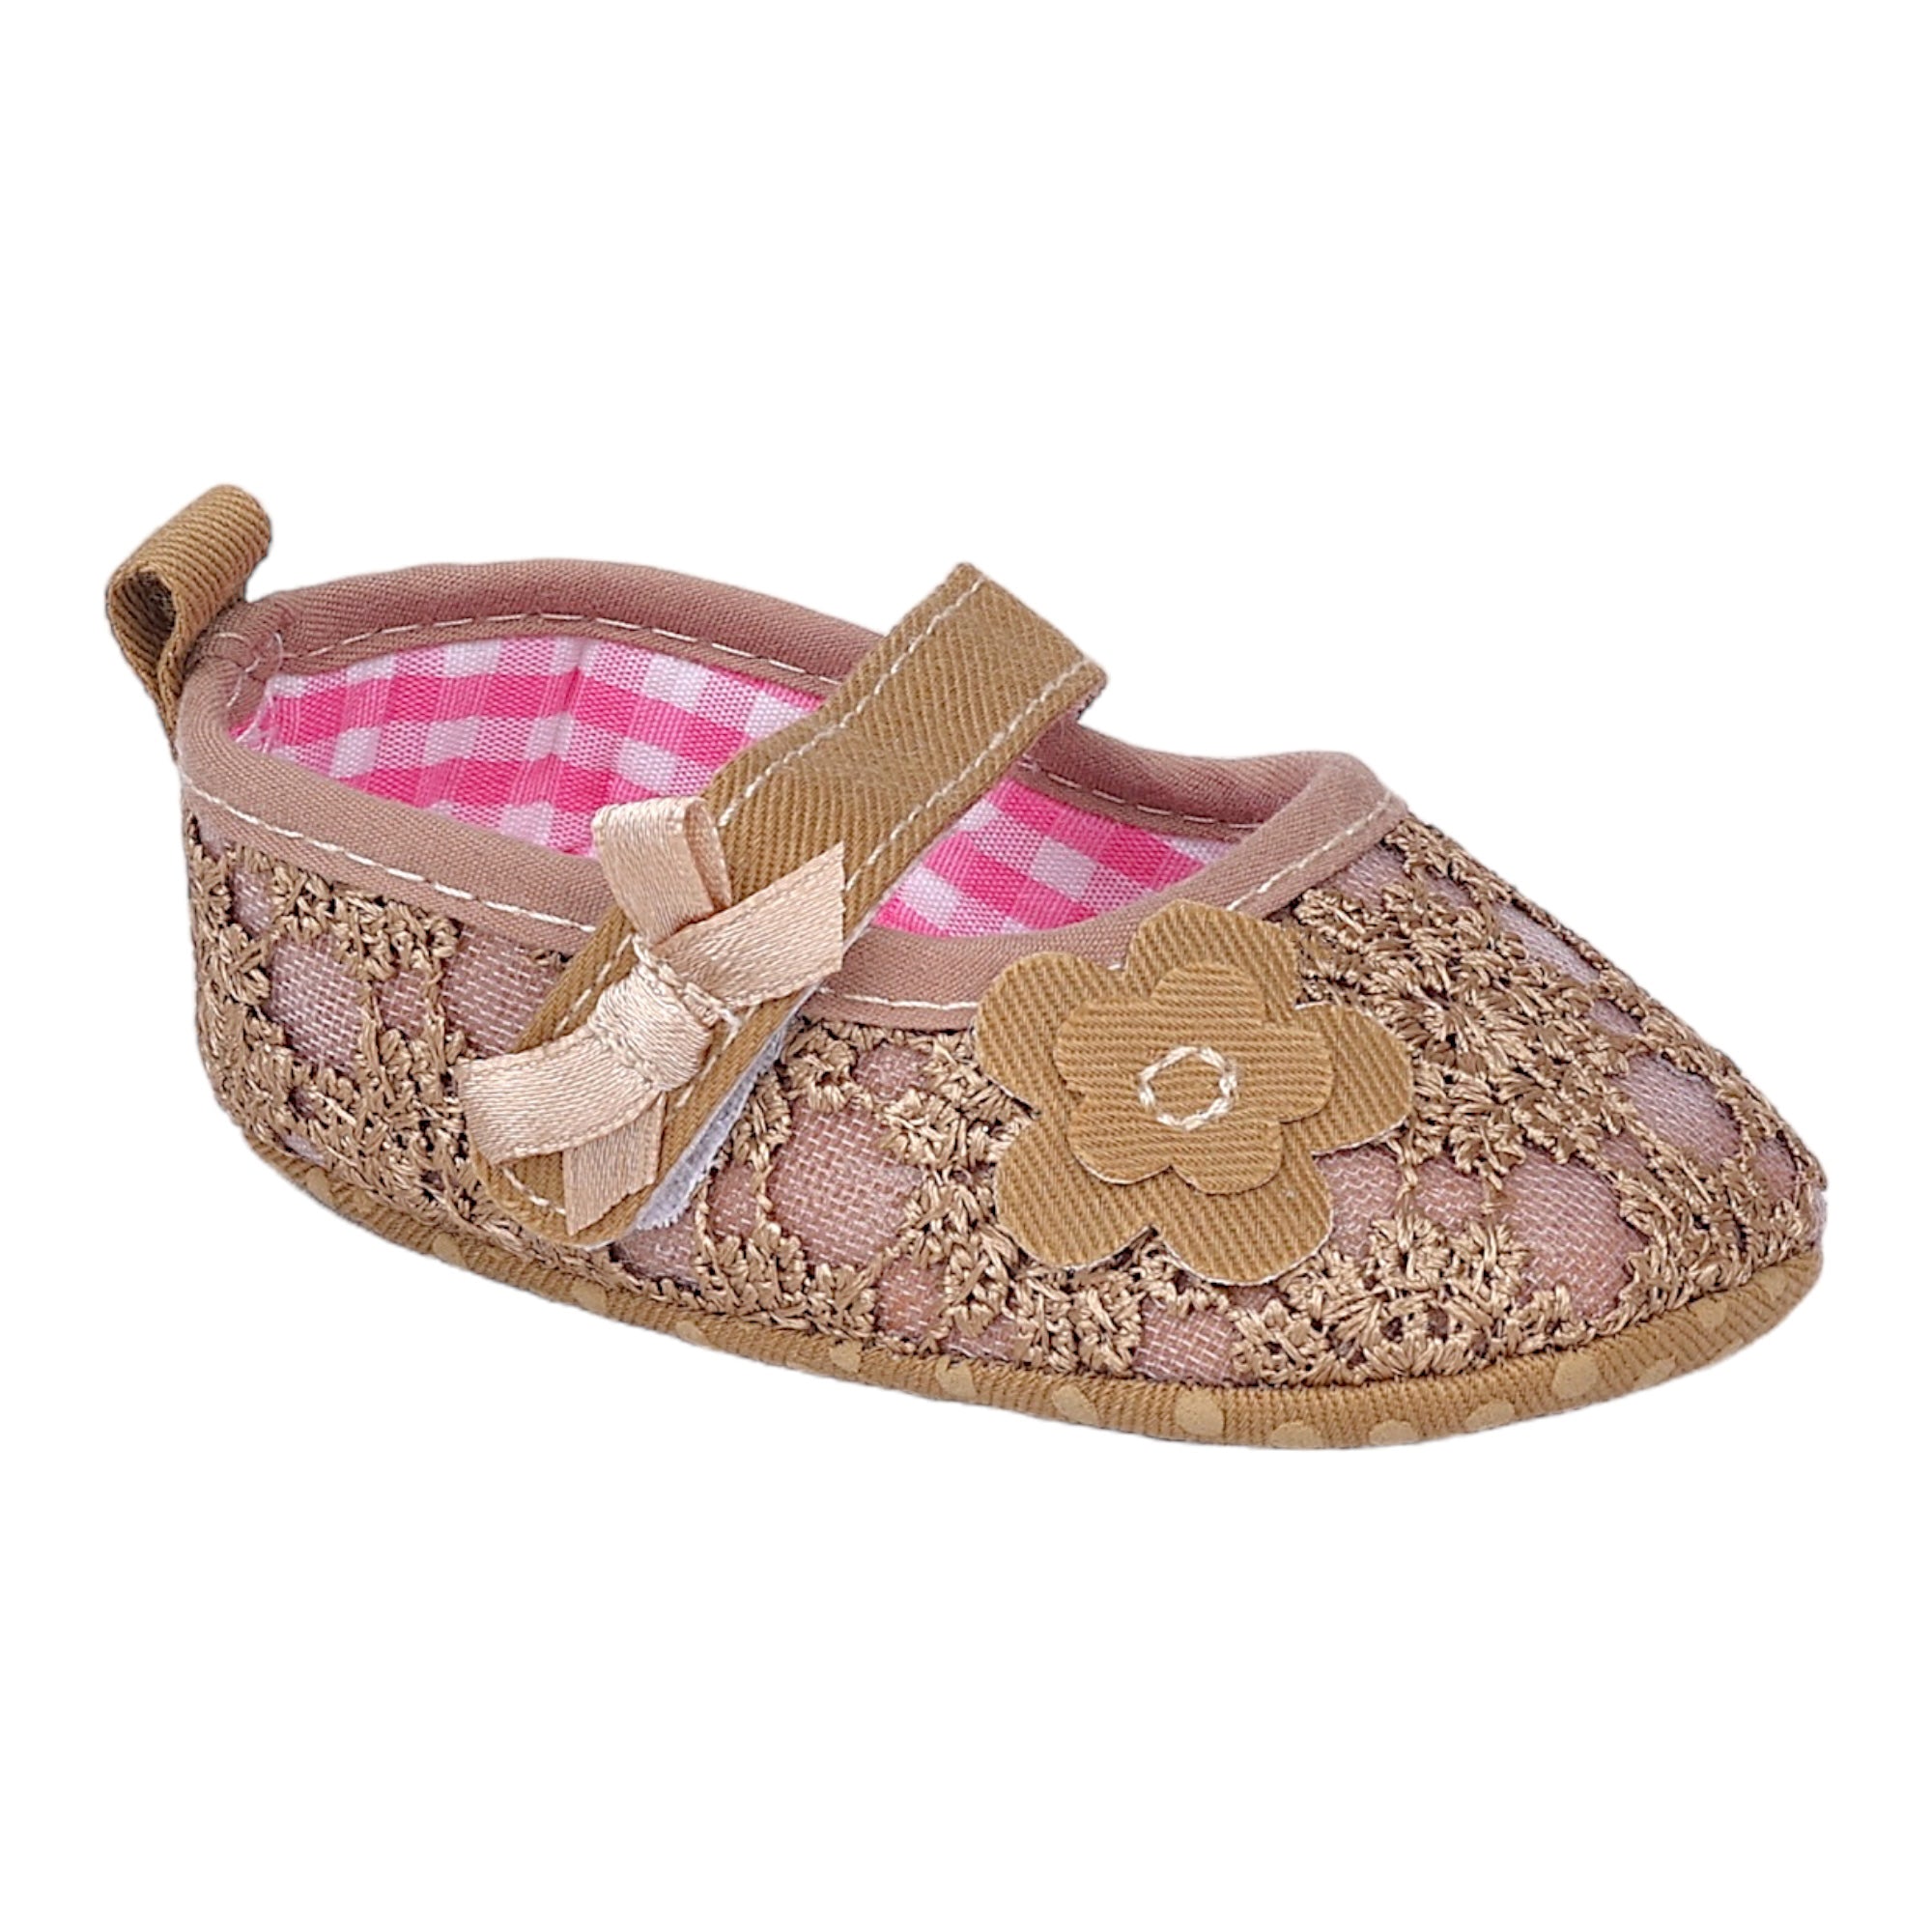 Baby Moo Floral Applique Lace Velcro Strap Ballerina Booties - Gold